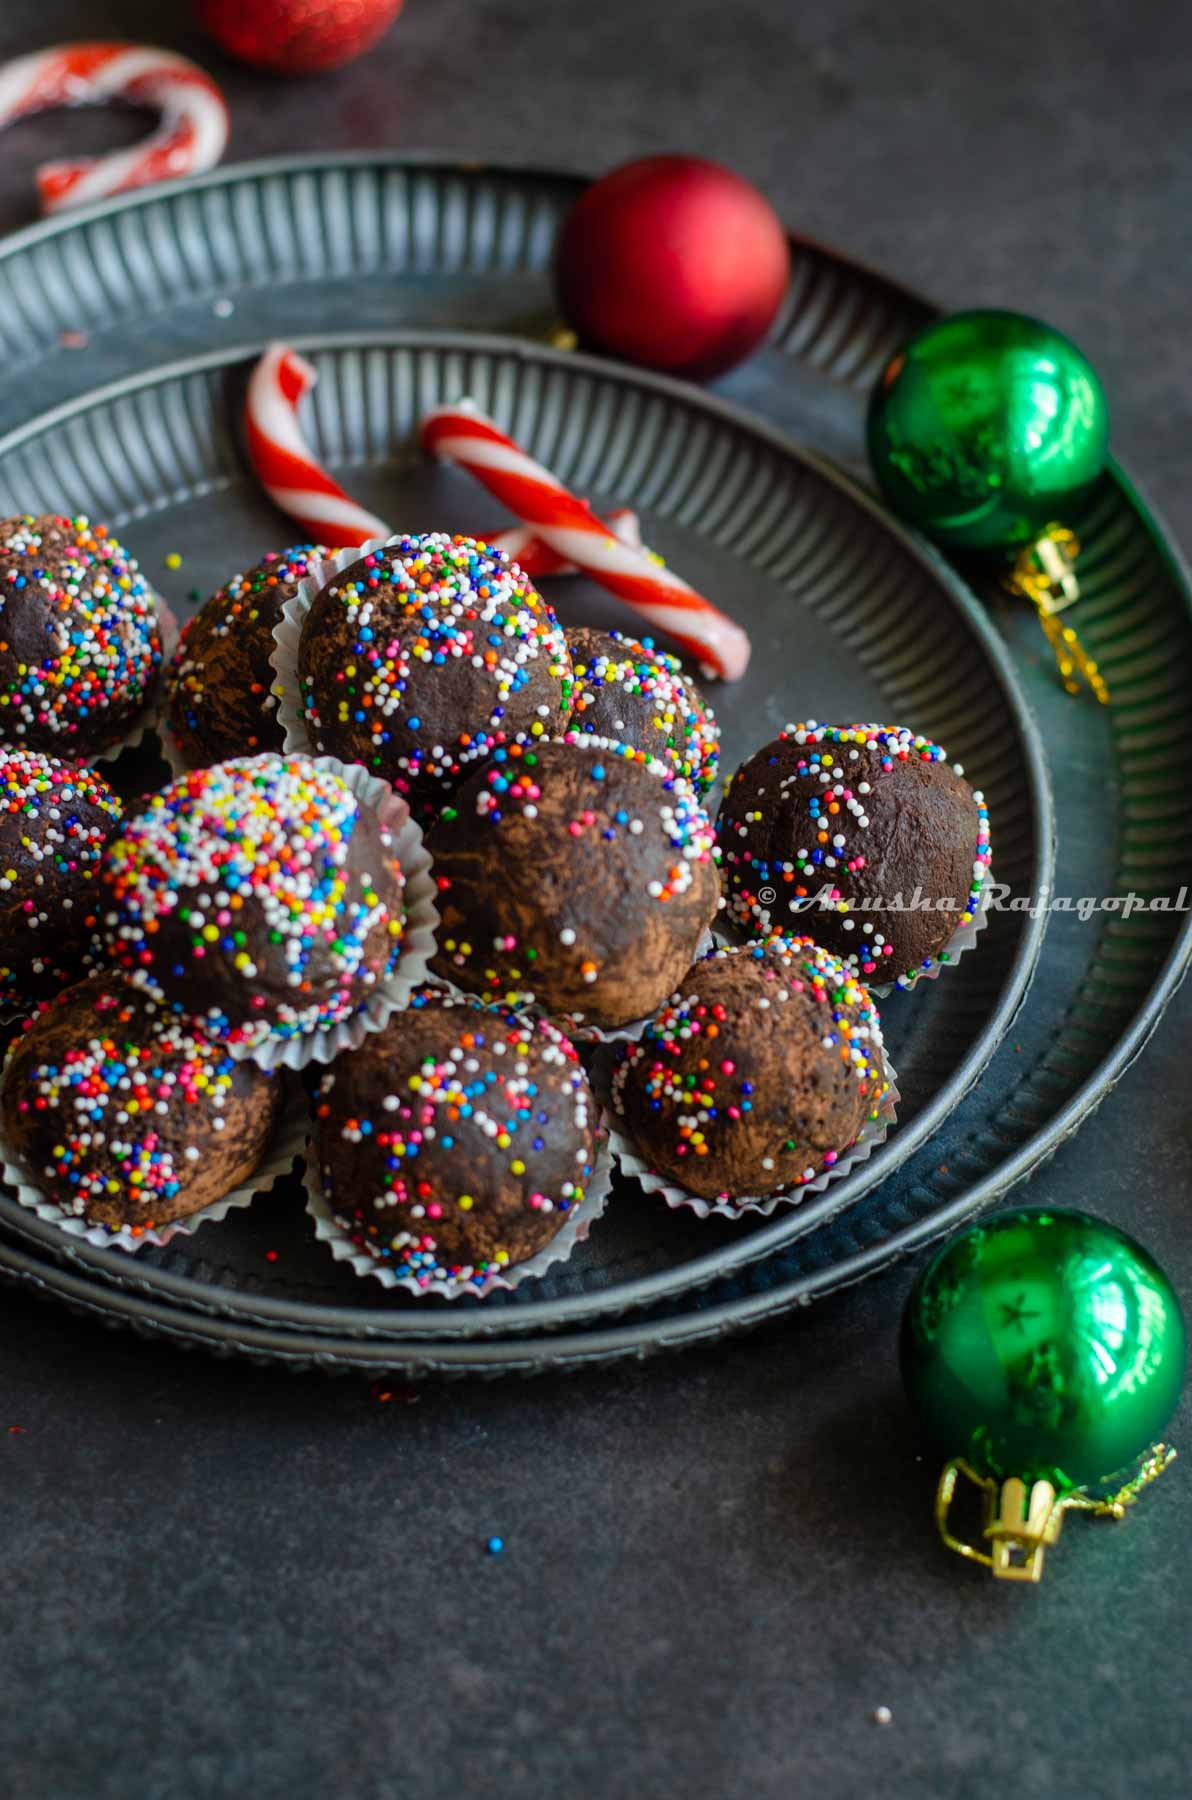 chocolate mint truffles shaped and placed in small muffin cups and arranged on a metal serving tray. Christmas tree decor at the background.